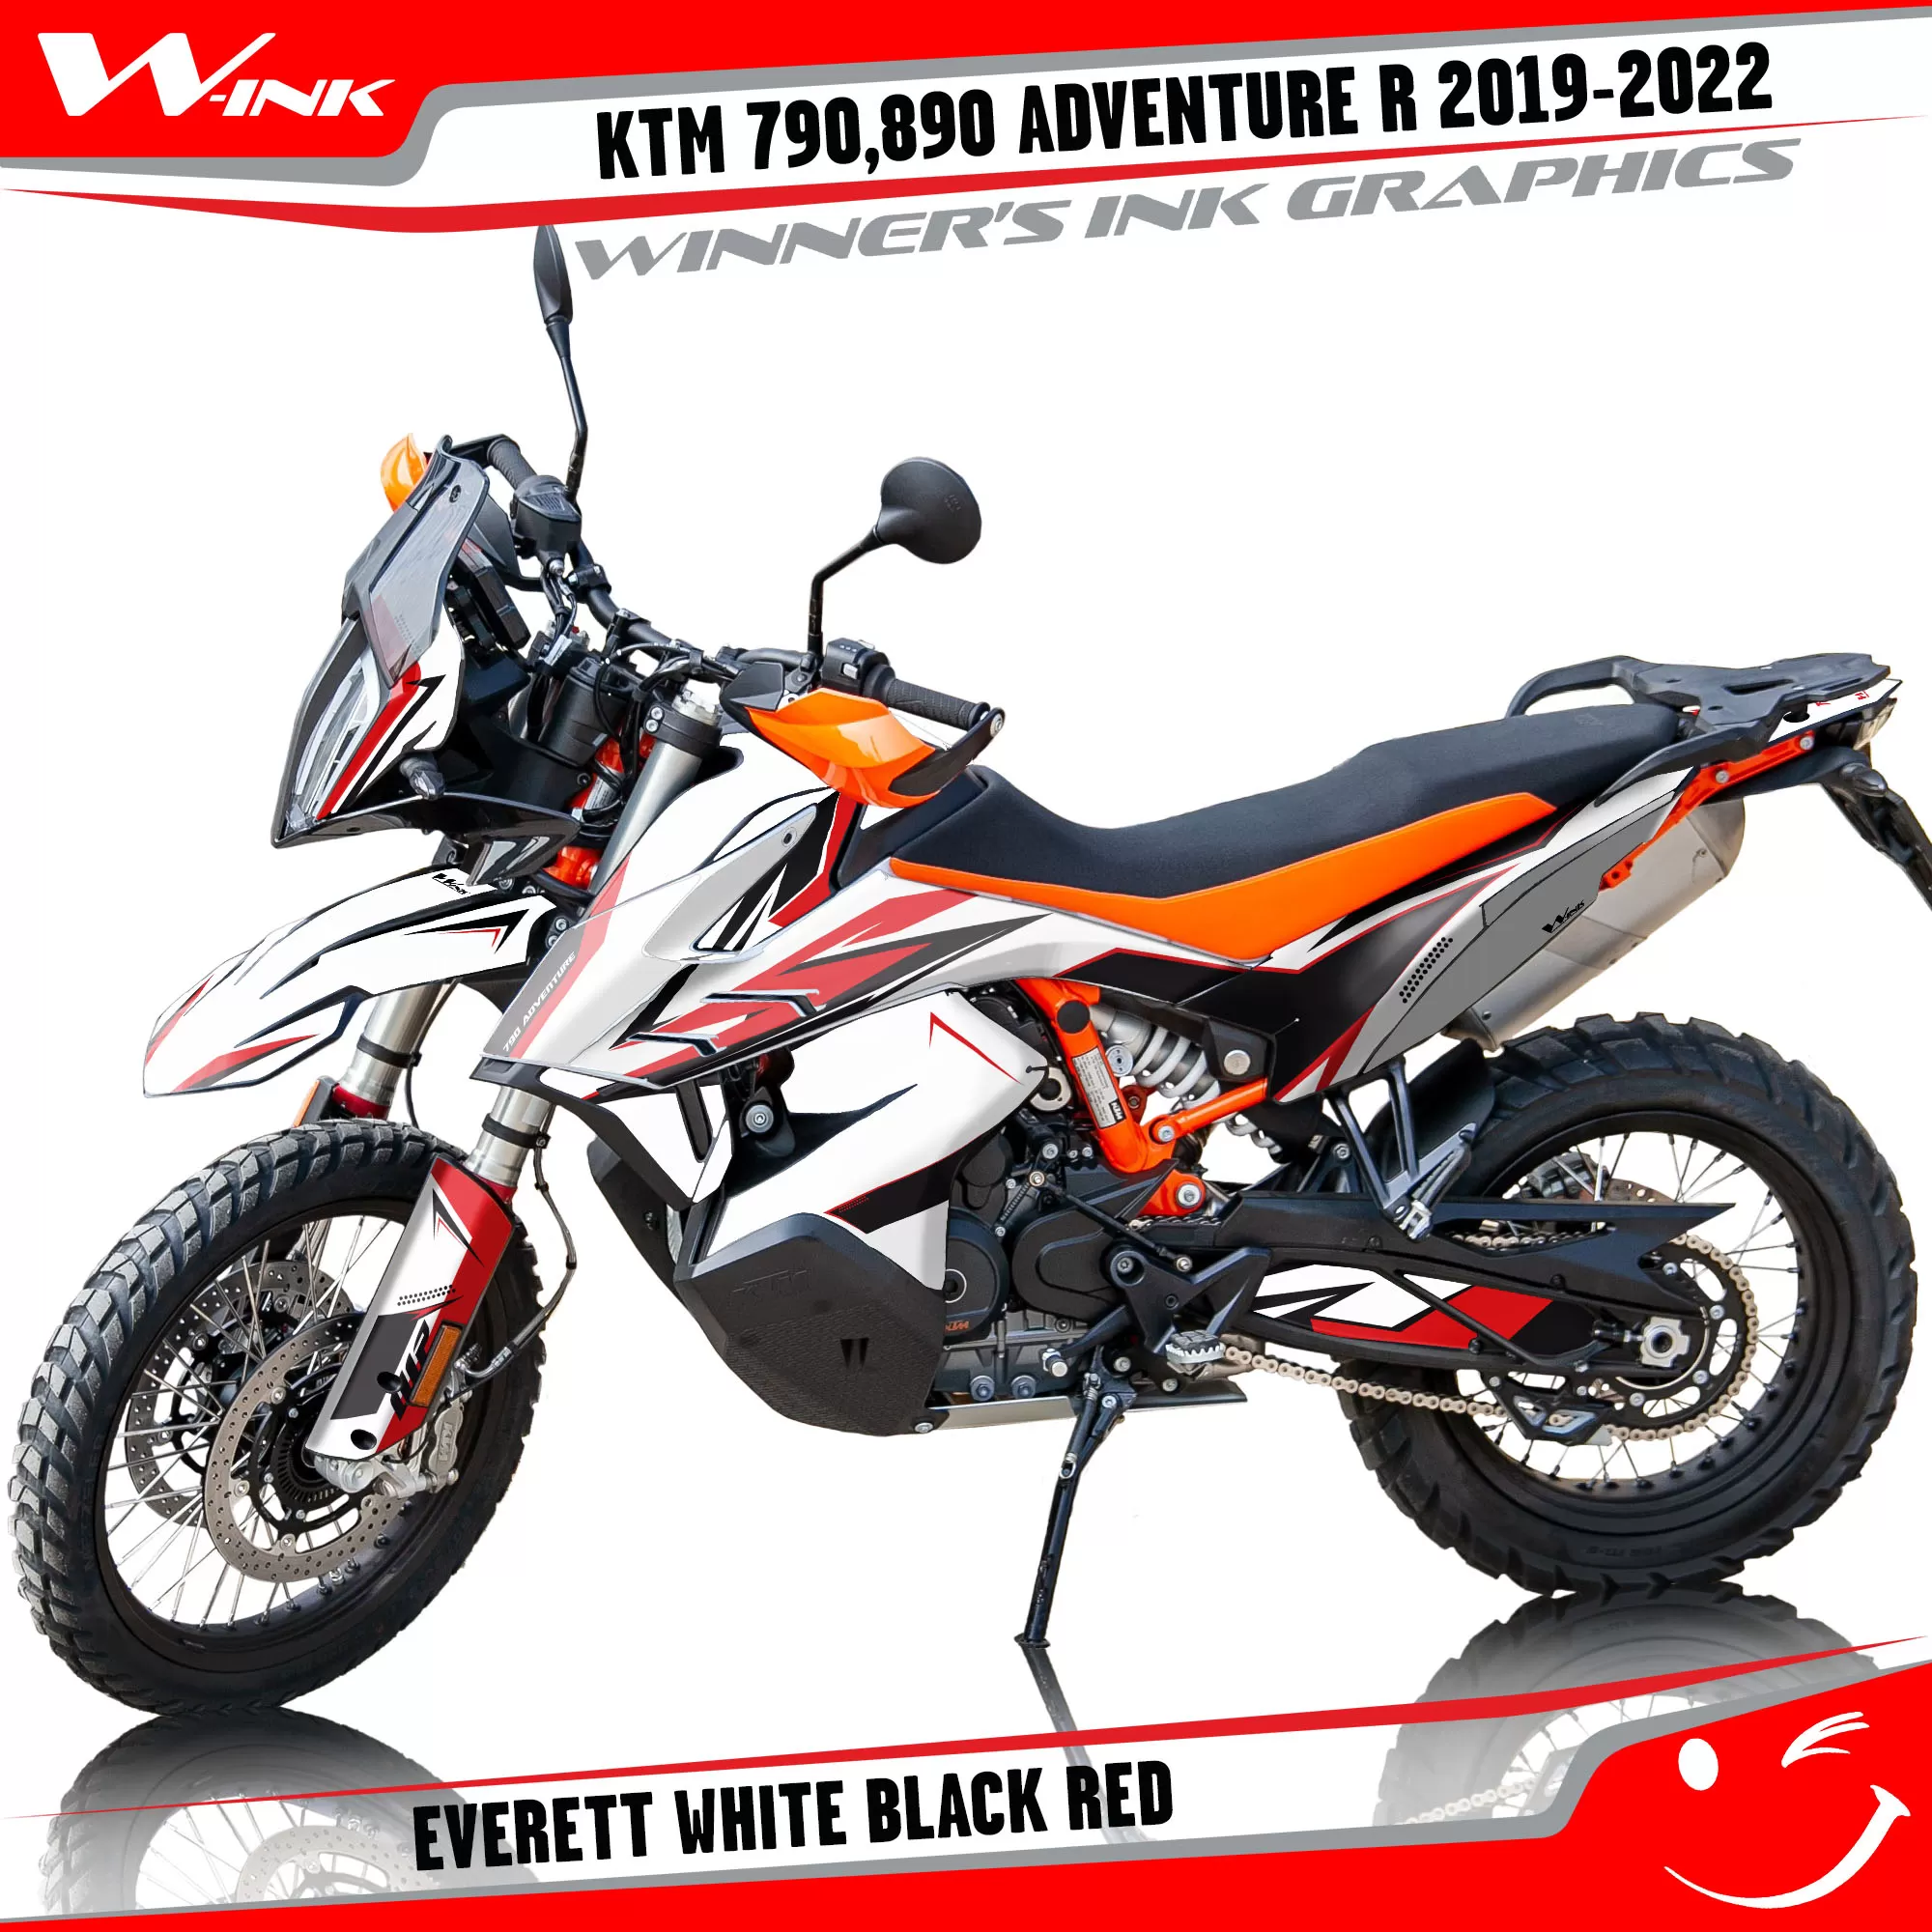 Adventure-R-790-890-2019-2020-2021-2022-graphics-kit-and-decals-with-designs-Everett-White-Black-Red